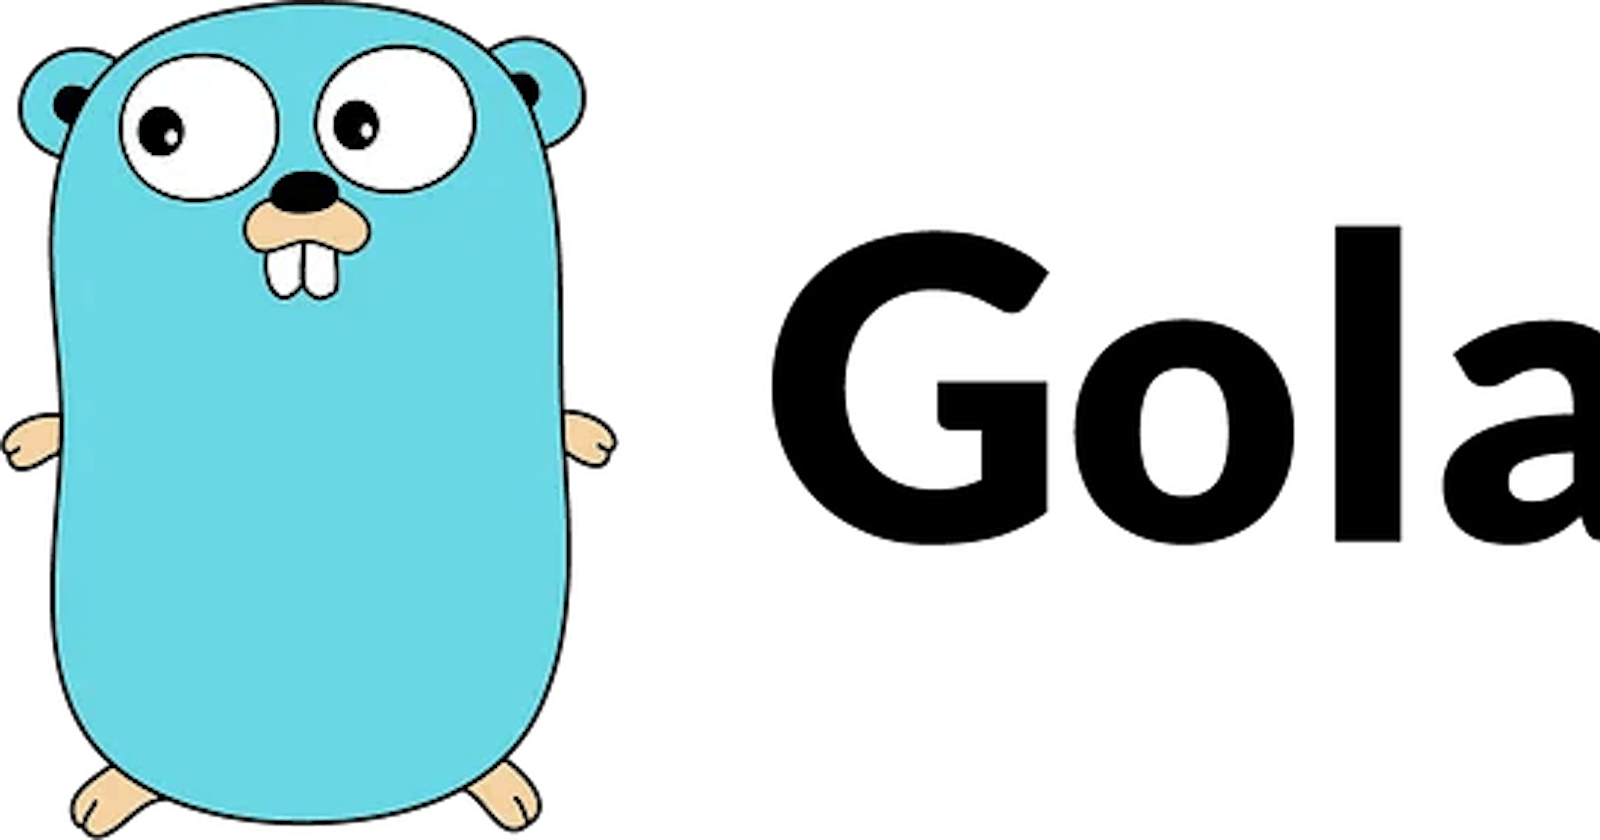 How to start with golang